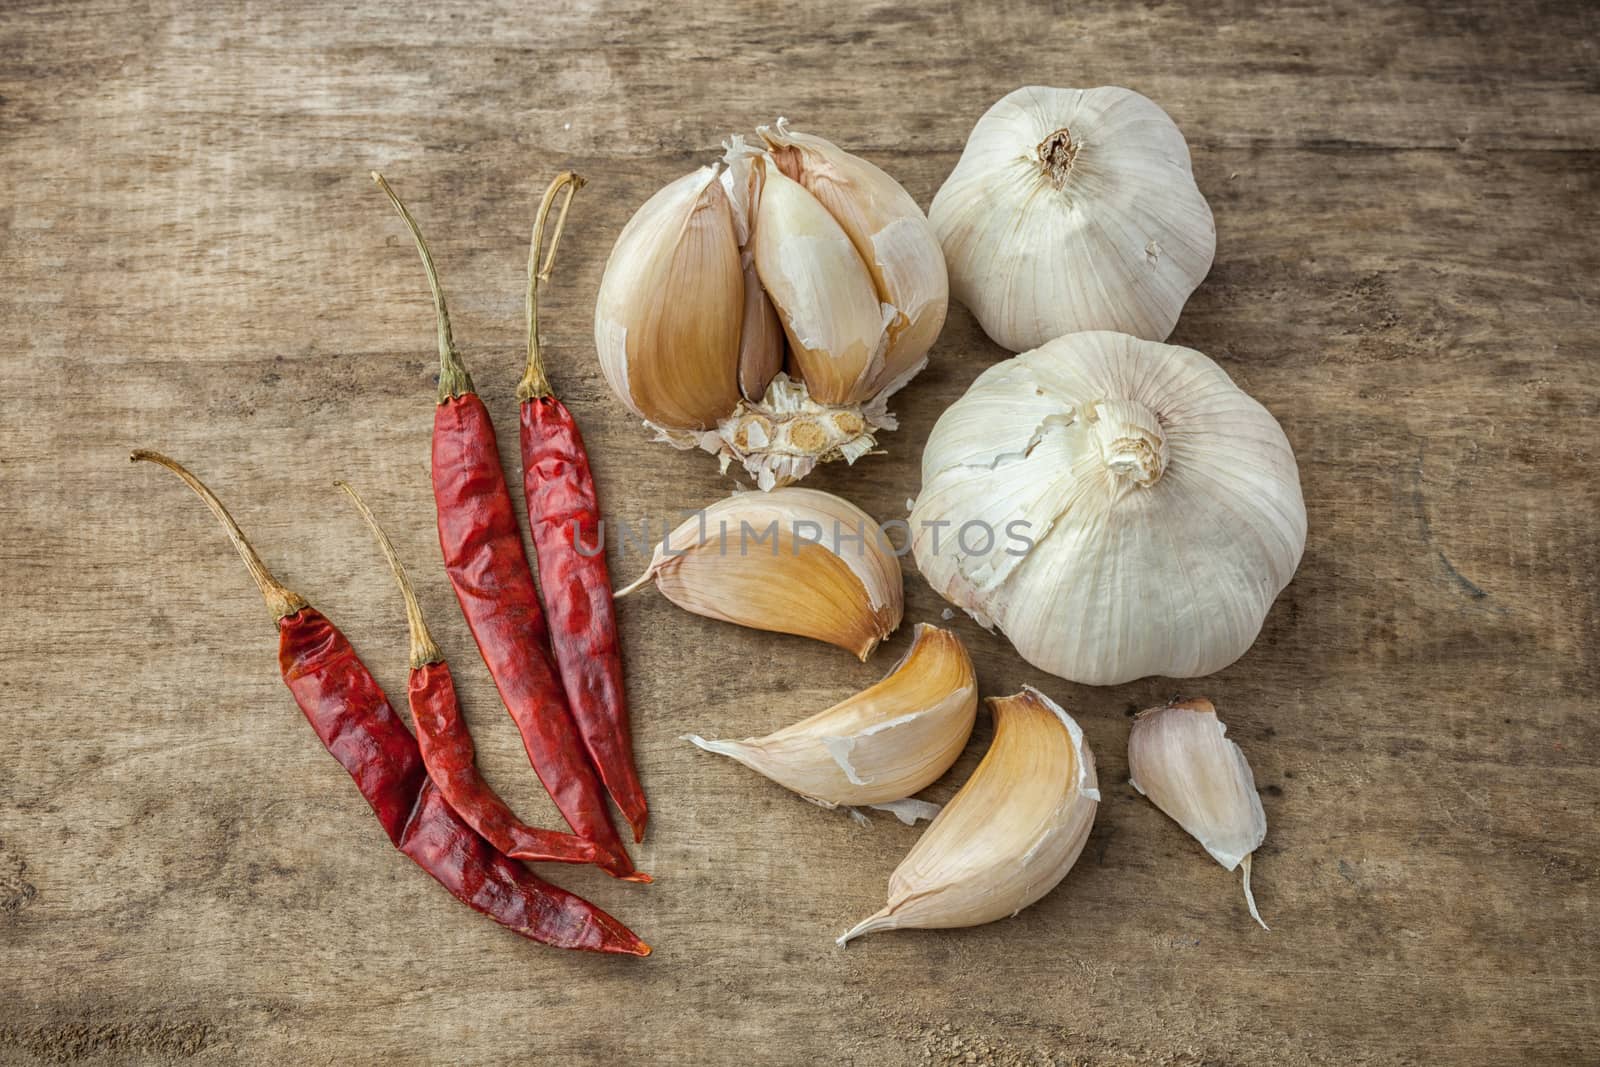 Dried red chili pepper and fresh garlic on wooden background by nopparats